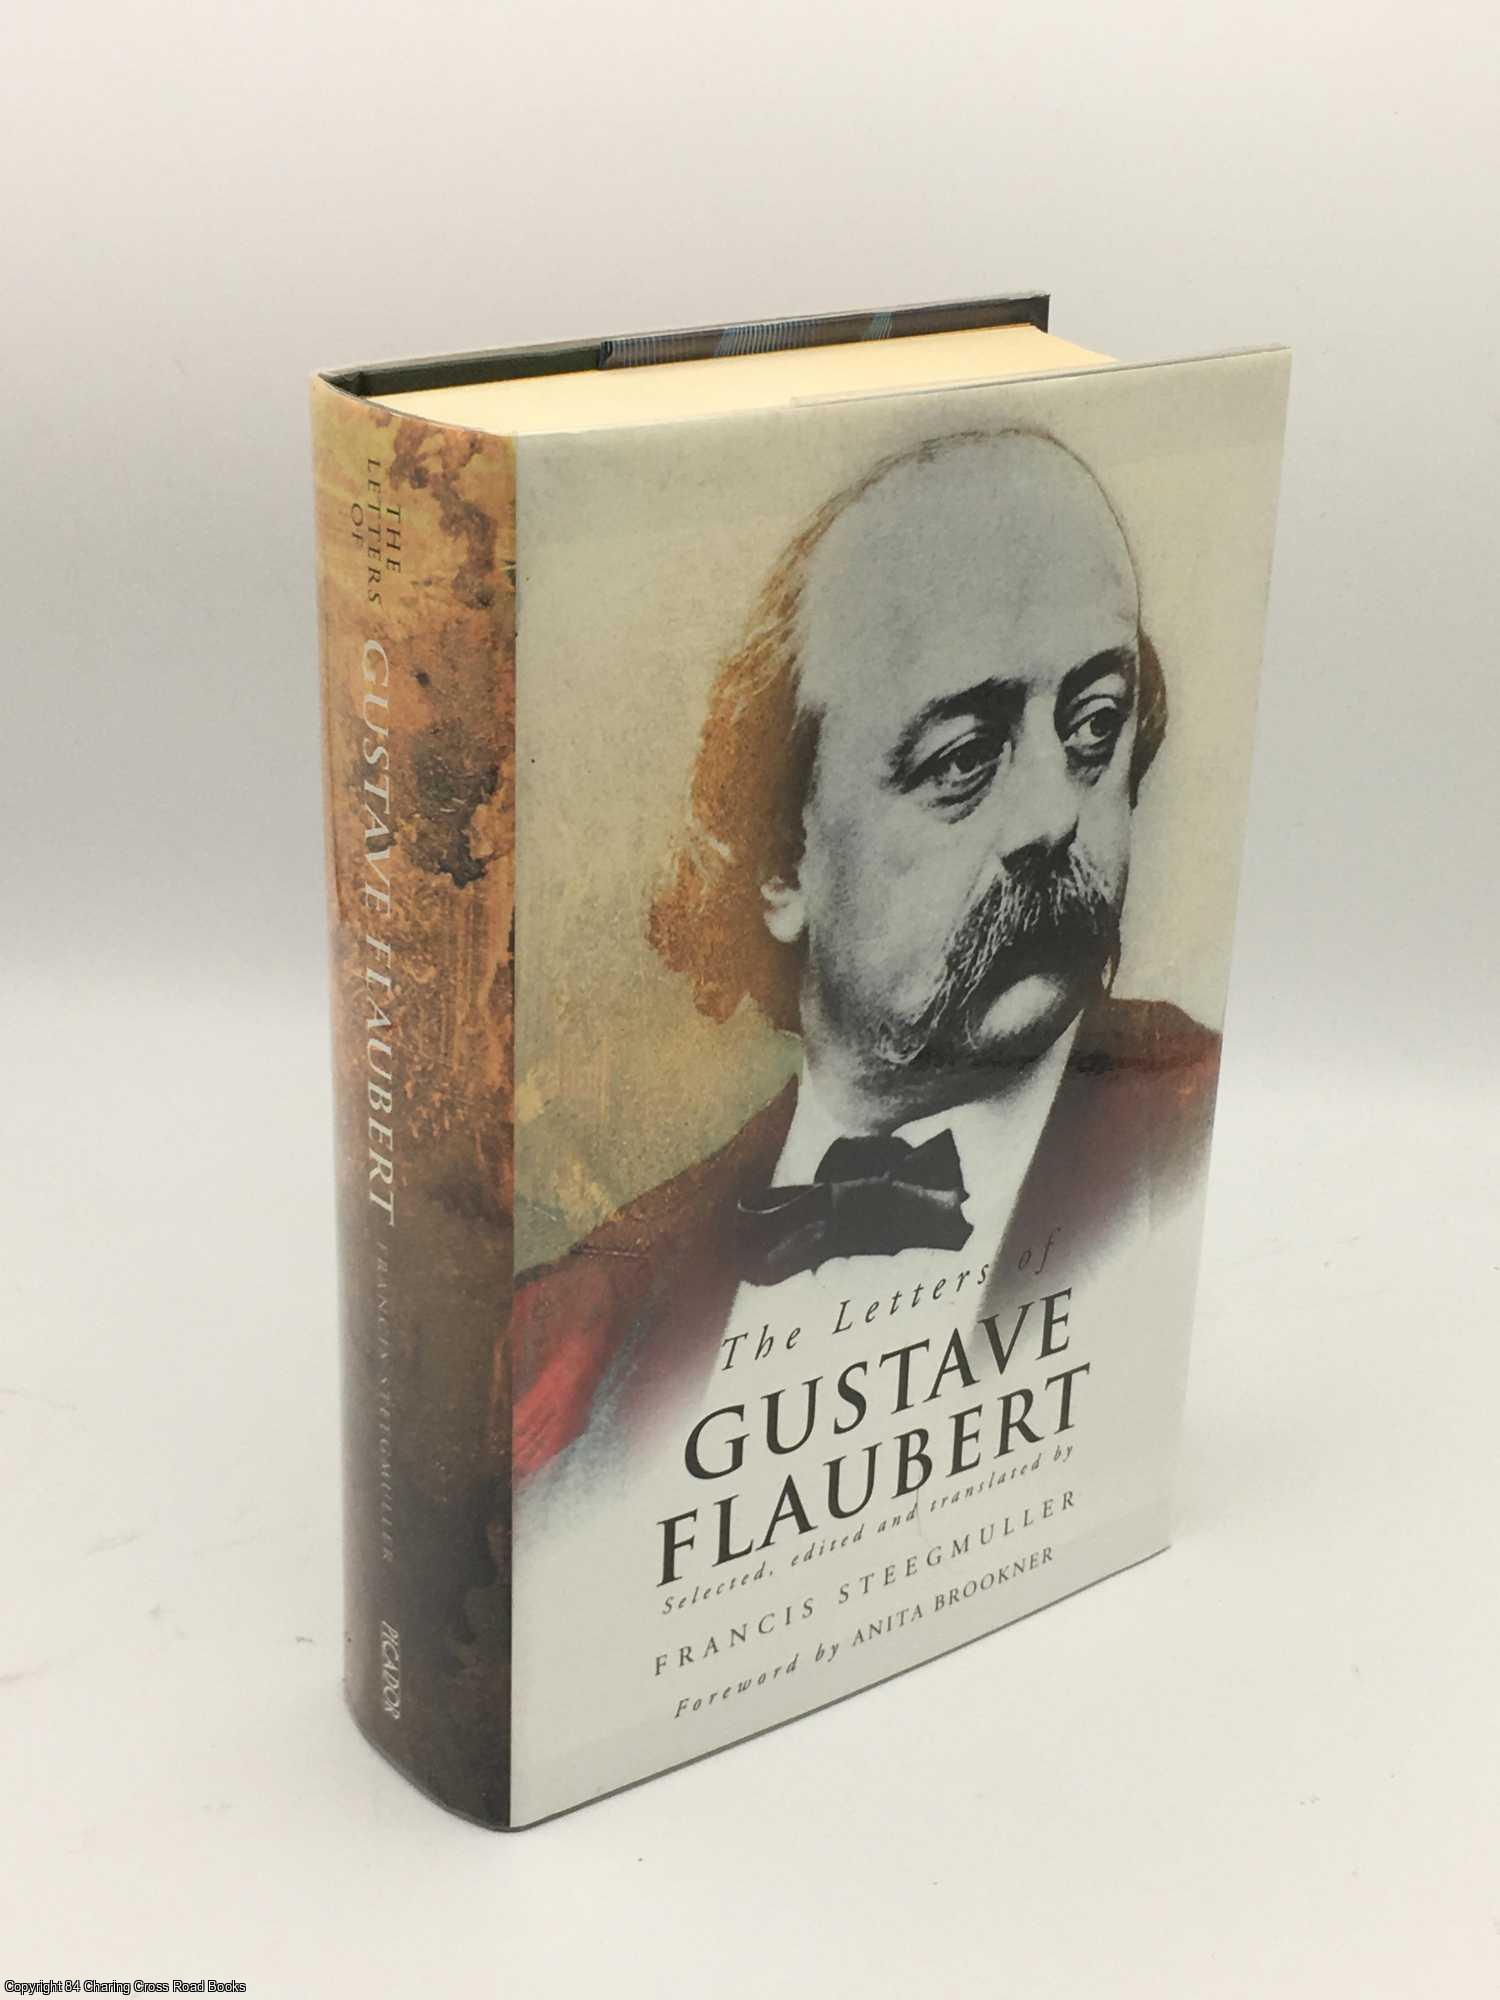 Steegmuller, Francis - The Letters of Gustave Flaubert 1830-1880